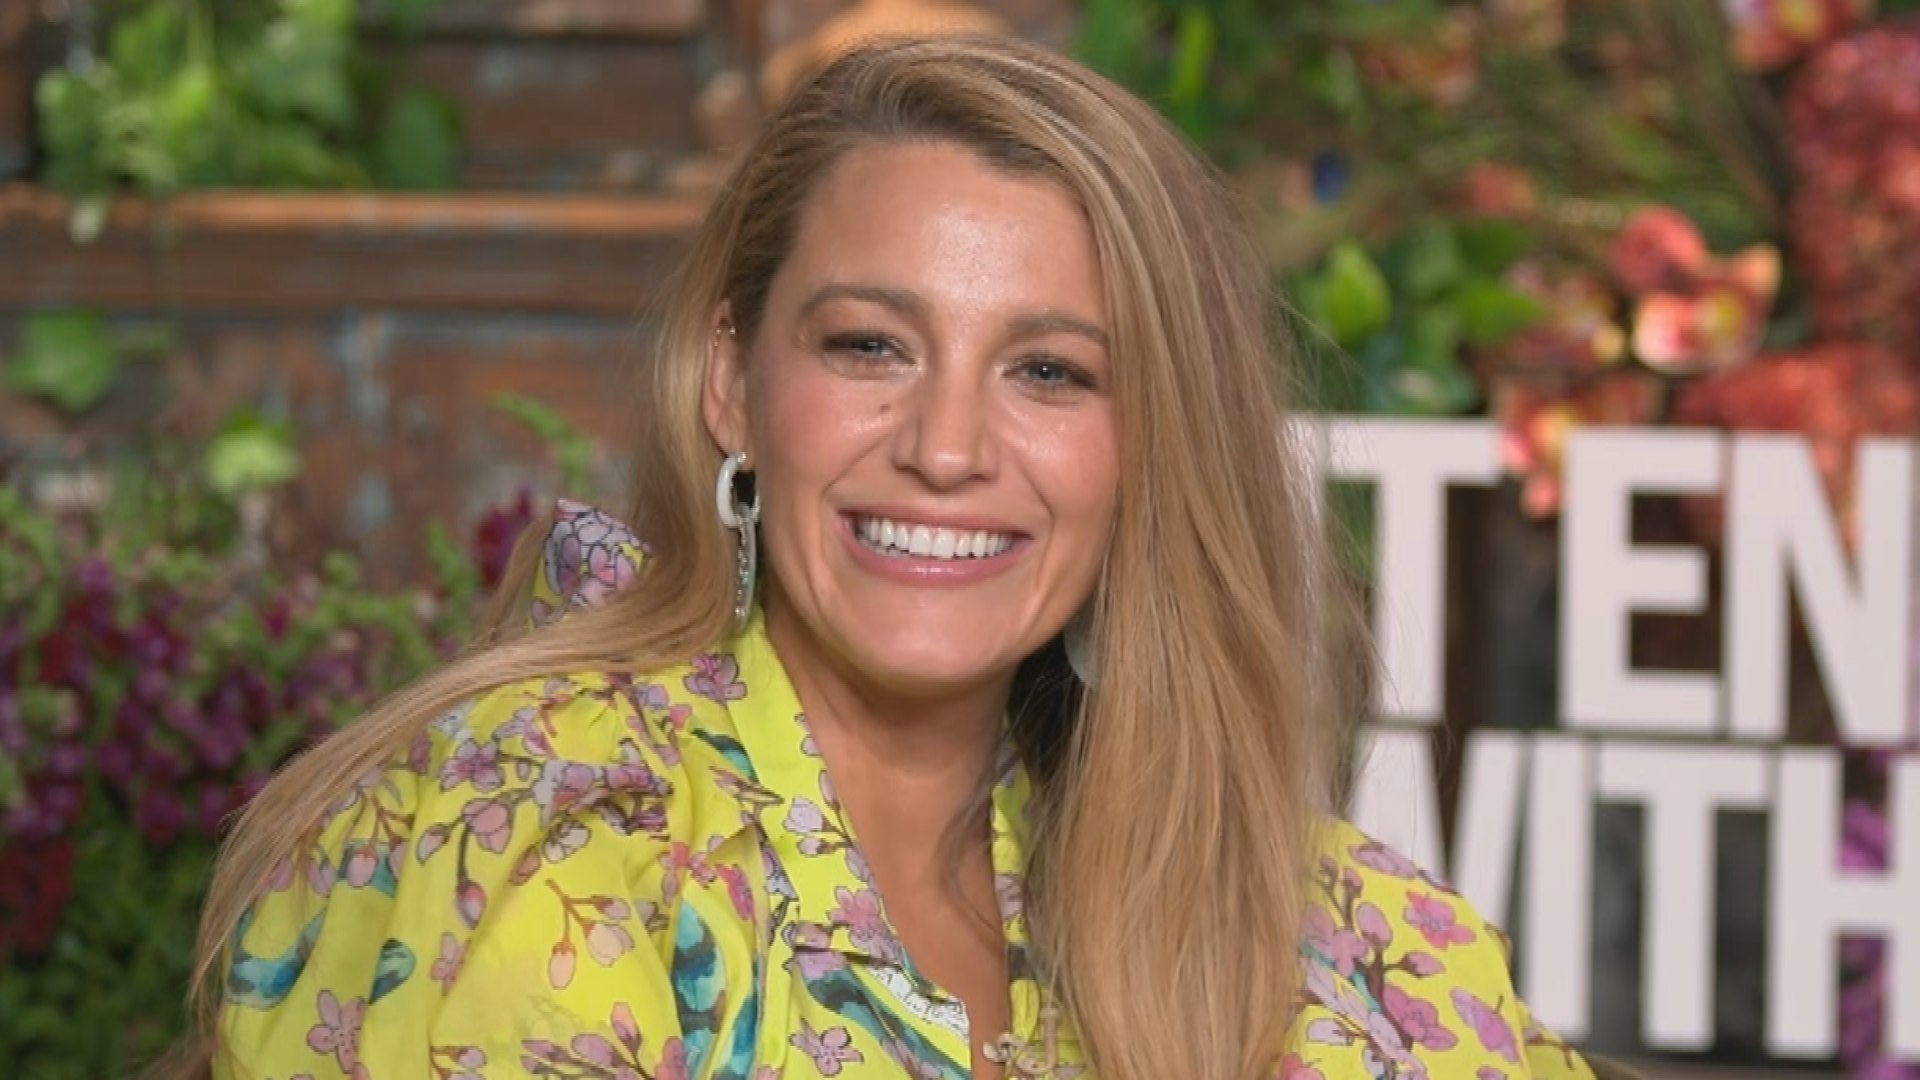 Blake Lively Says She Feels 'Guilty' Trying to Balance Work With Family Time (Exclusive)